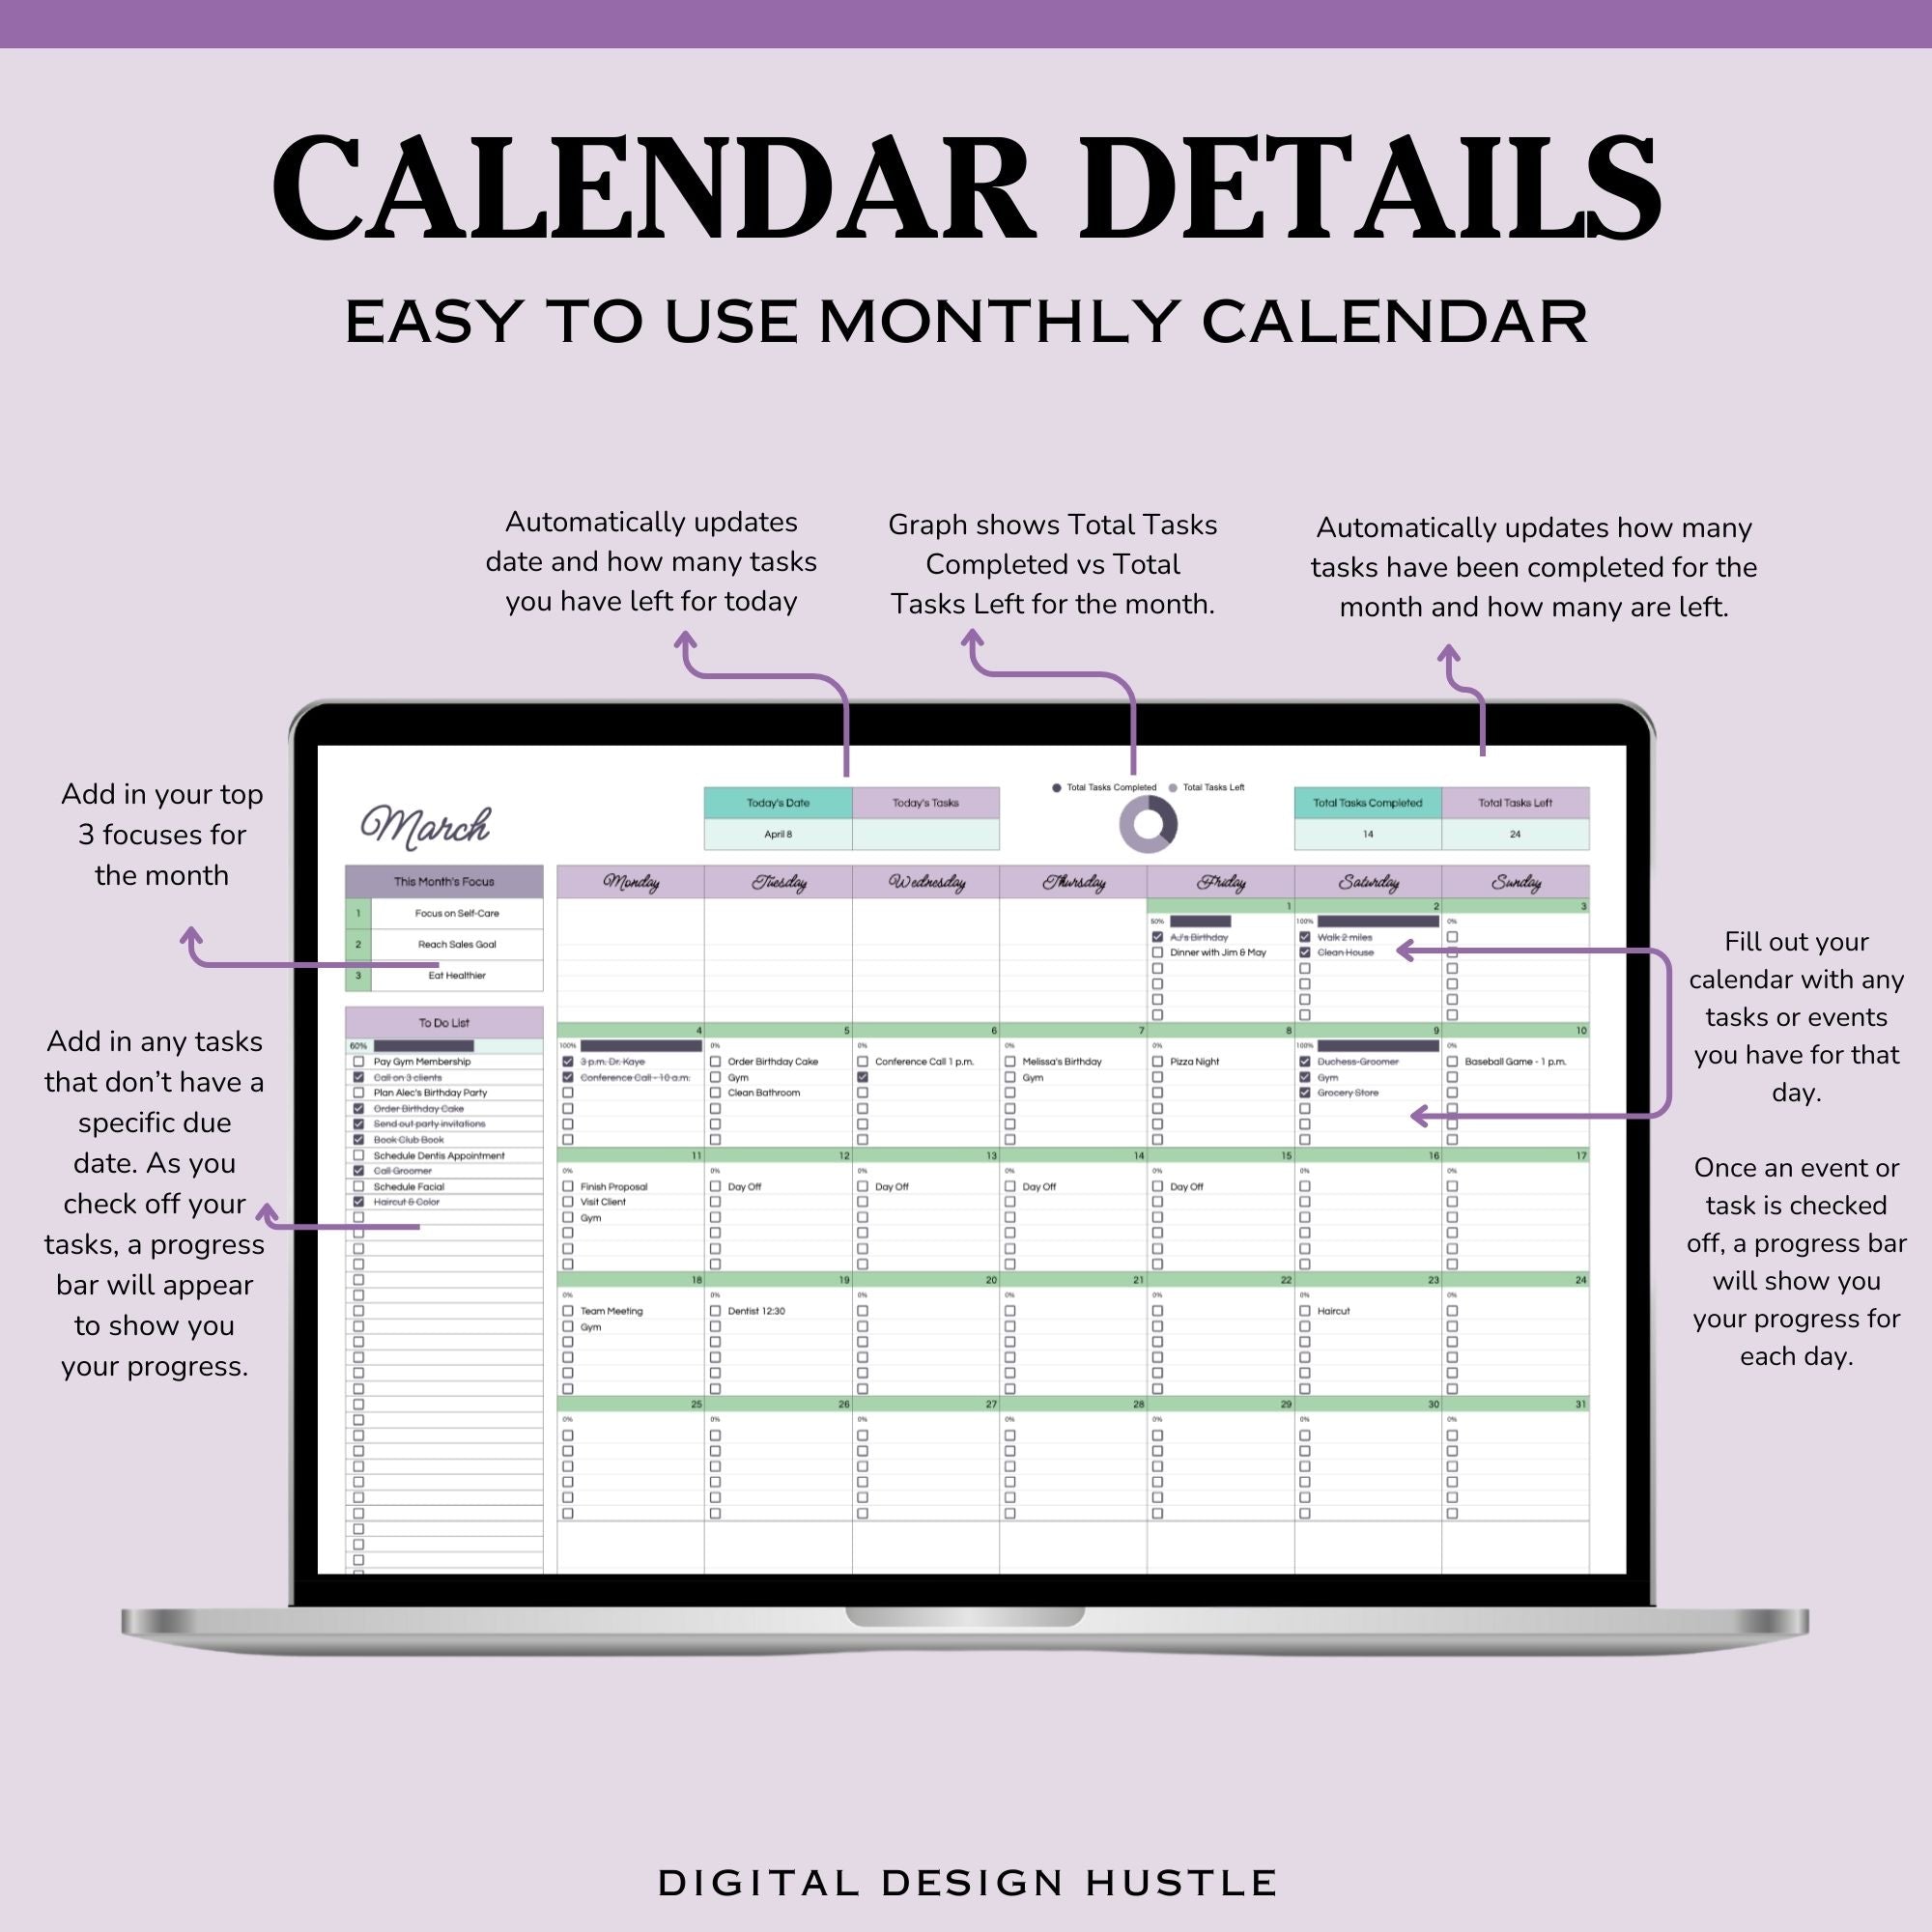 Stay organized and stylish with our Boho Chic Google Sheets Monthly Calendar! This editable spreadsheet is your ultimate tool for tracking tasks, projects, and creating to-do lists for each month. With trendy Boho colors and 12 tabs—one for each month—keeping track of your schedule has never been more visually appealing.